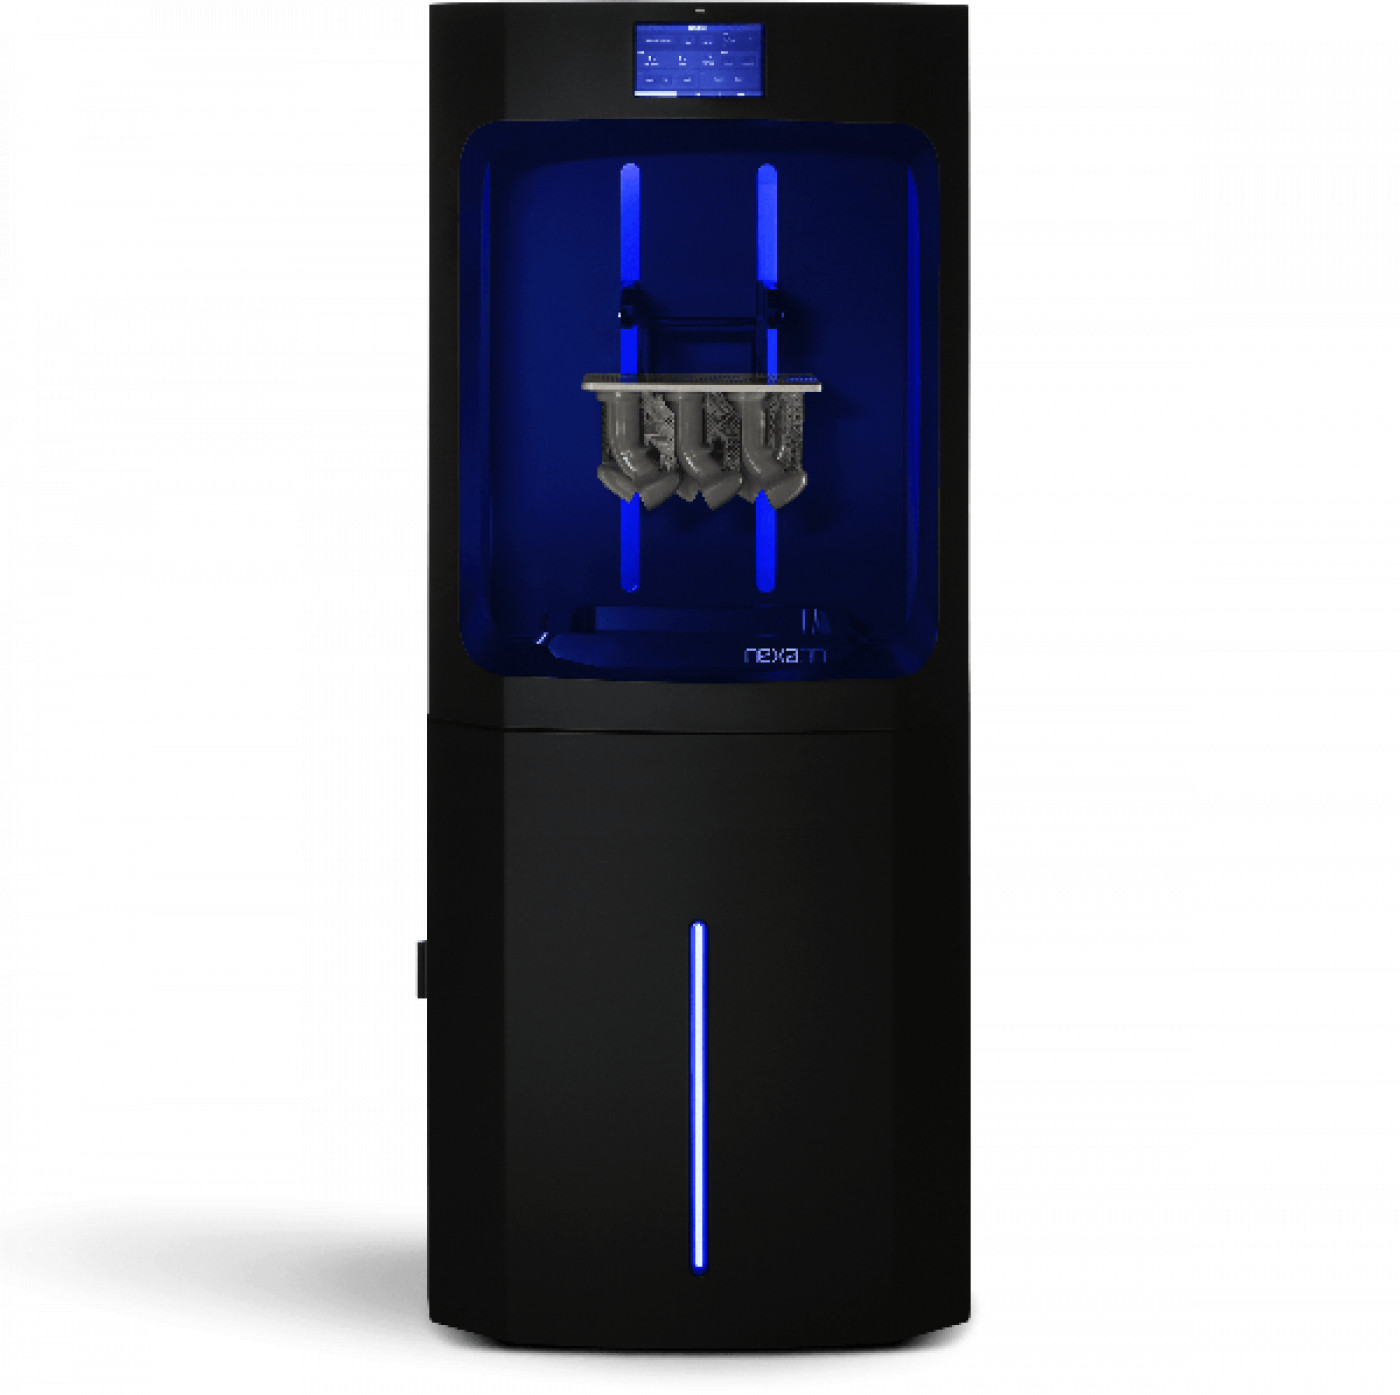 Using the Nexa3D NXE 400 3D printer to create prototypes in one day and minimize costs